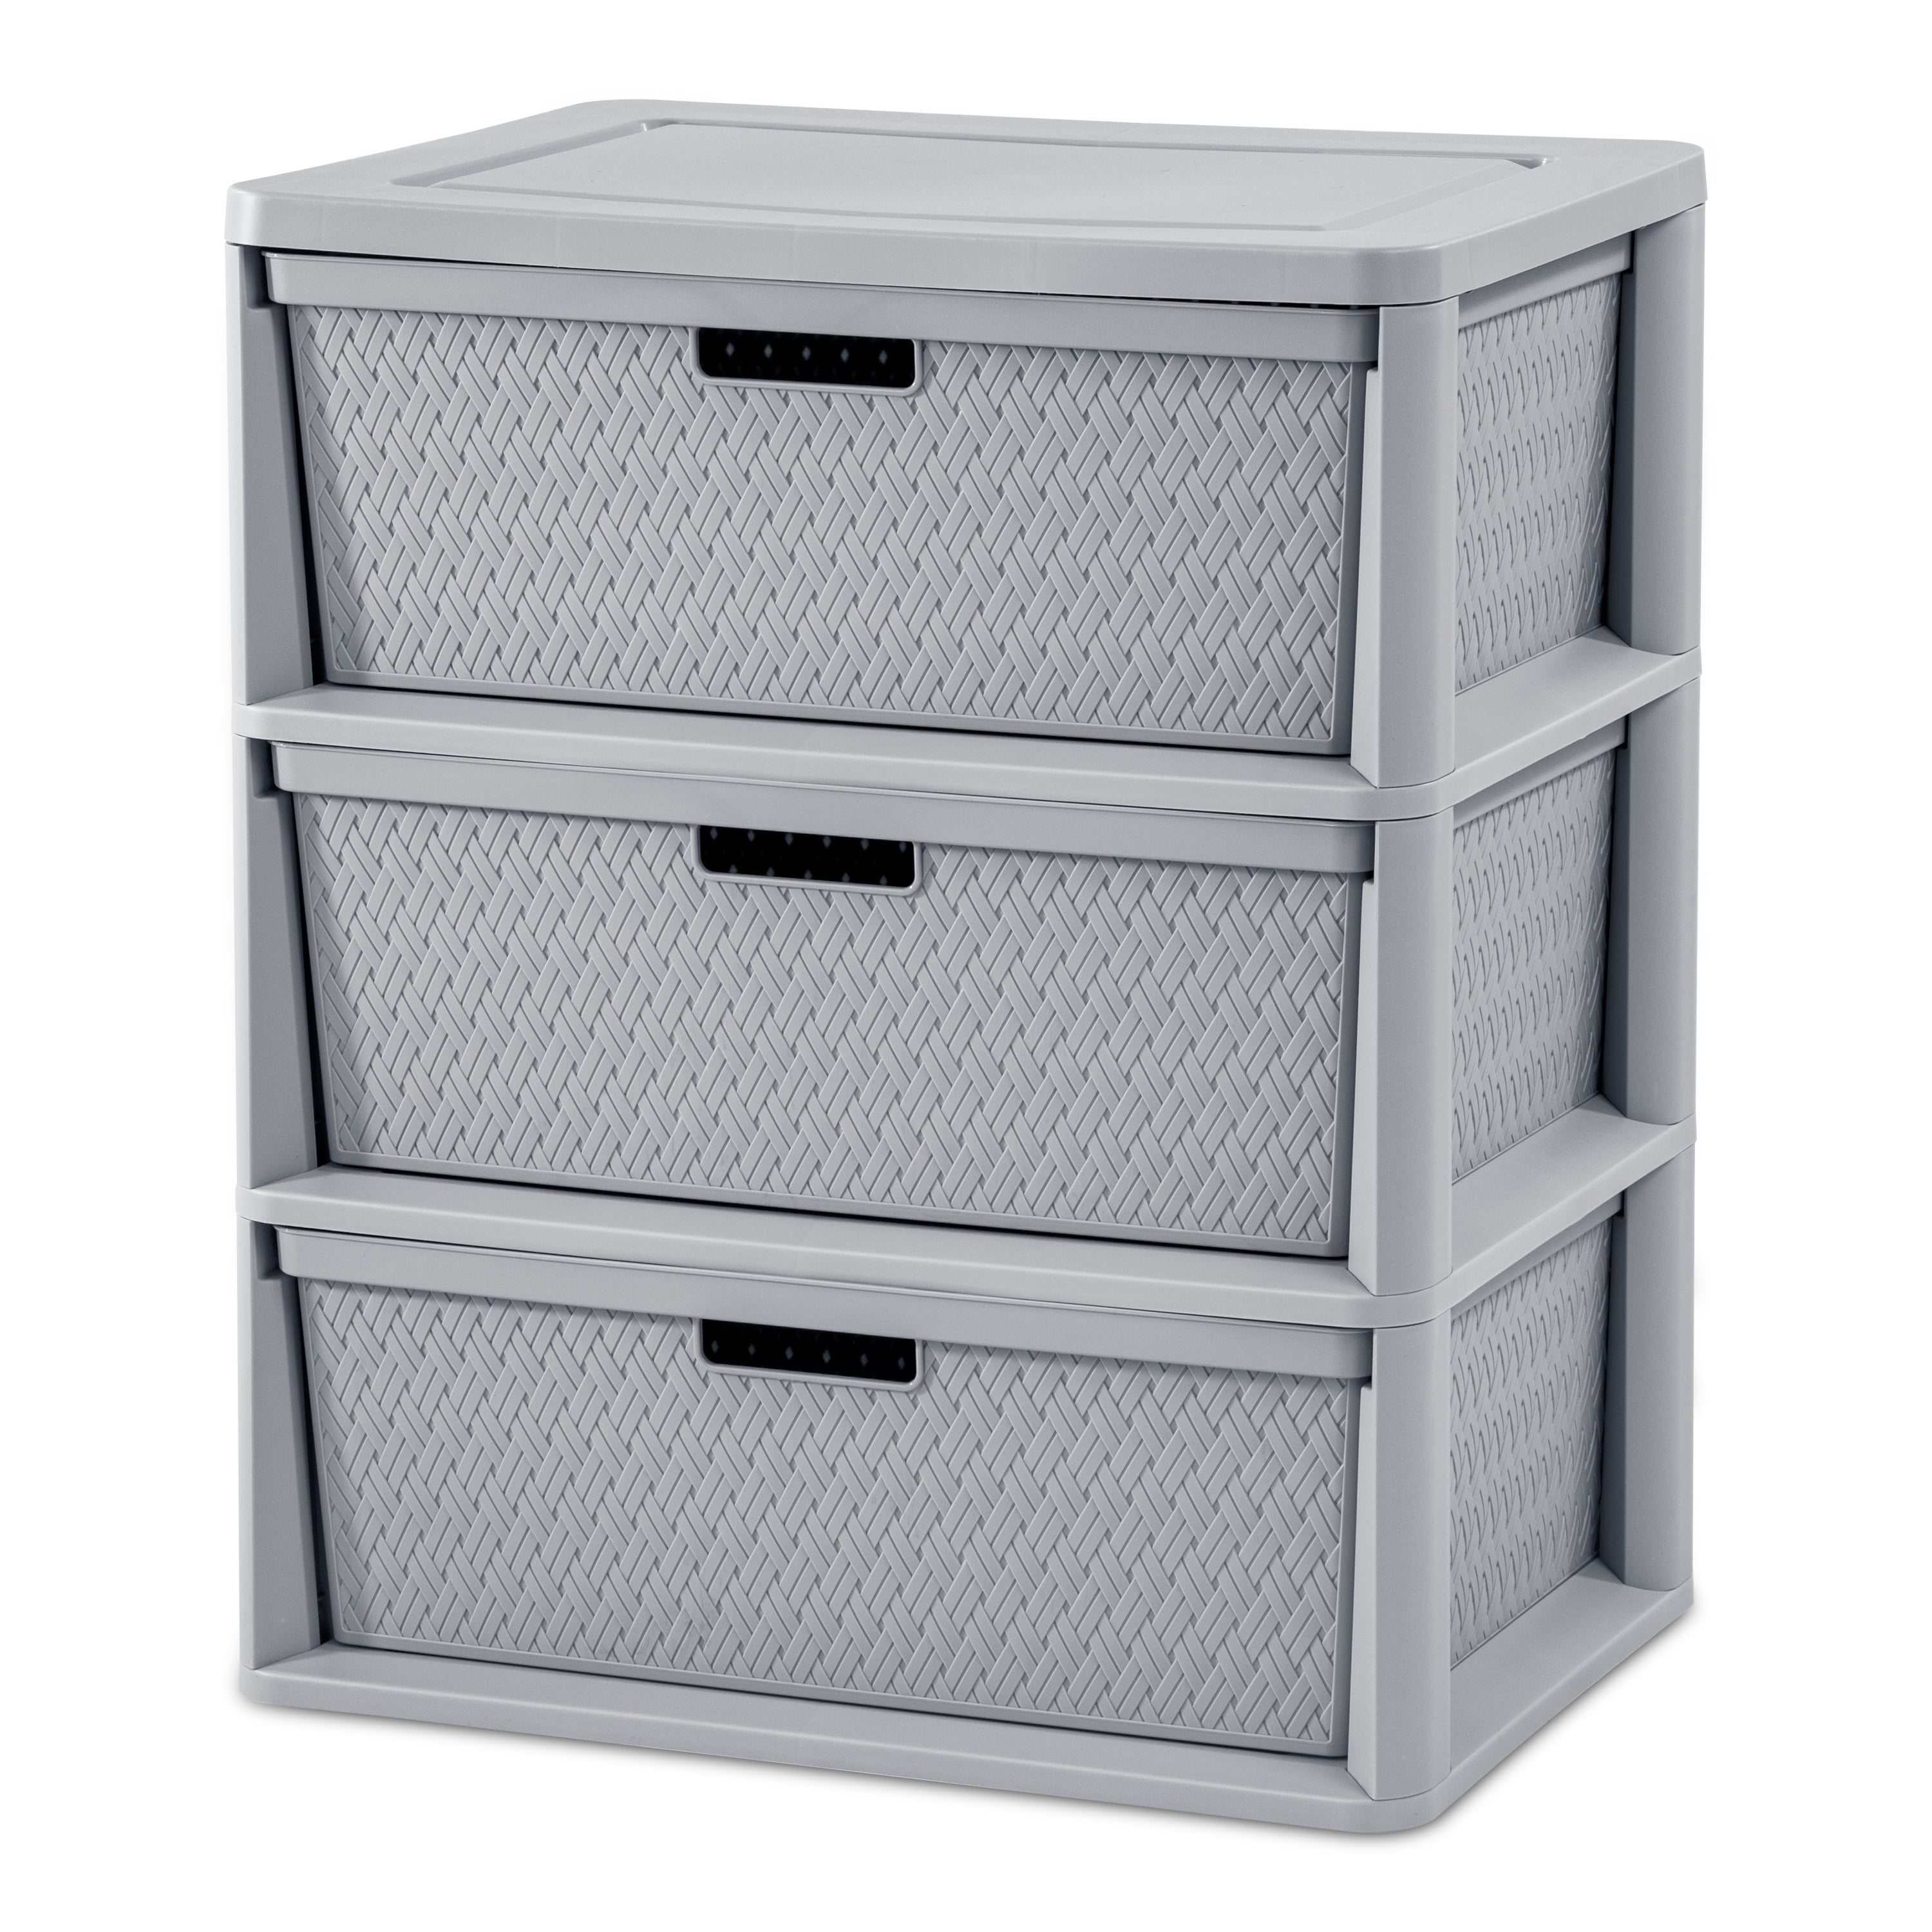 Espresso Frame & Drawers w/Driftwood Handles 21.63 Inches, 2-Pack STERILITE 25306P01 3 Drawer Wide Weave Tower